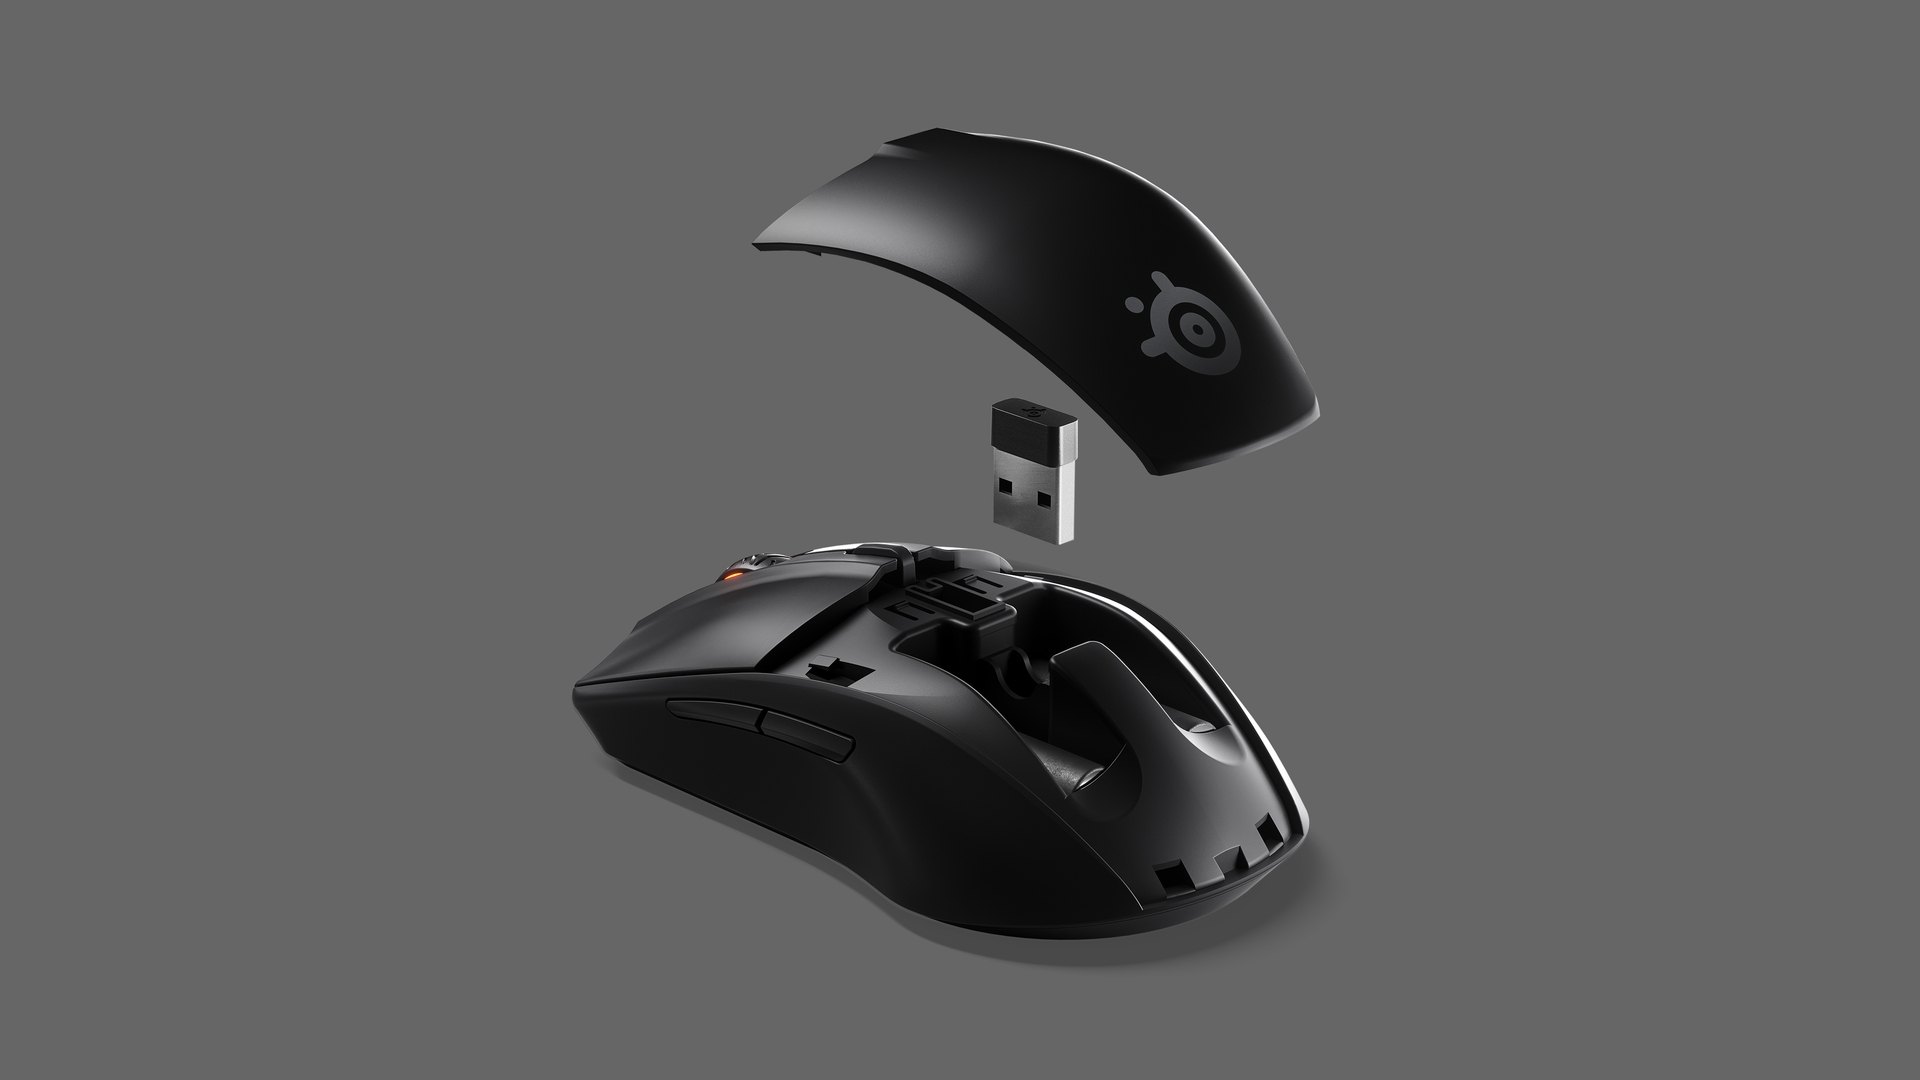 Render of the bottom side of the mouse to show the TrueMove sensor